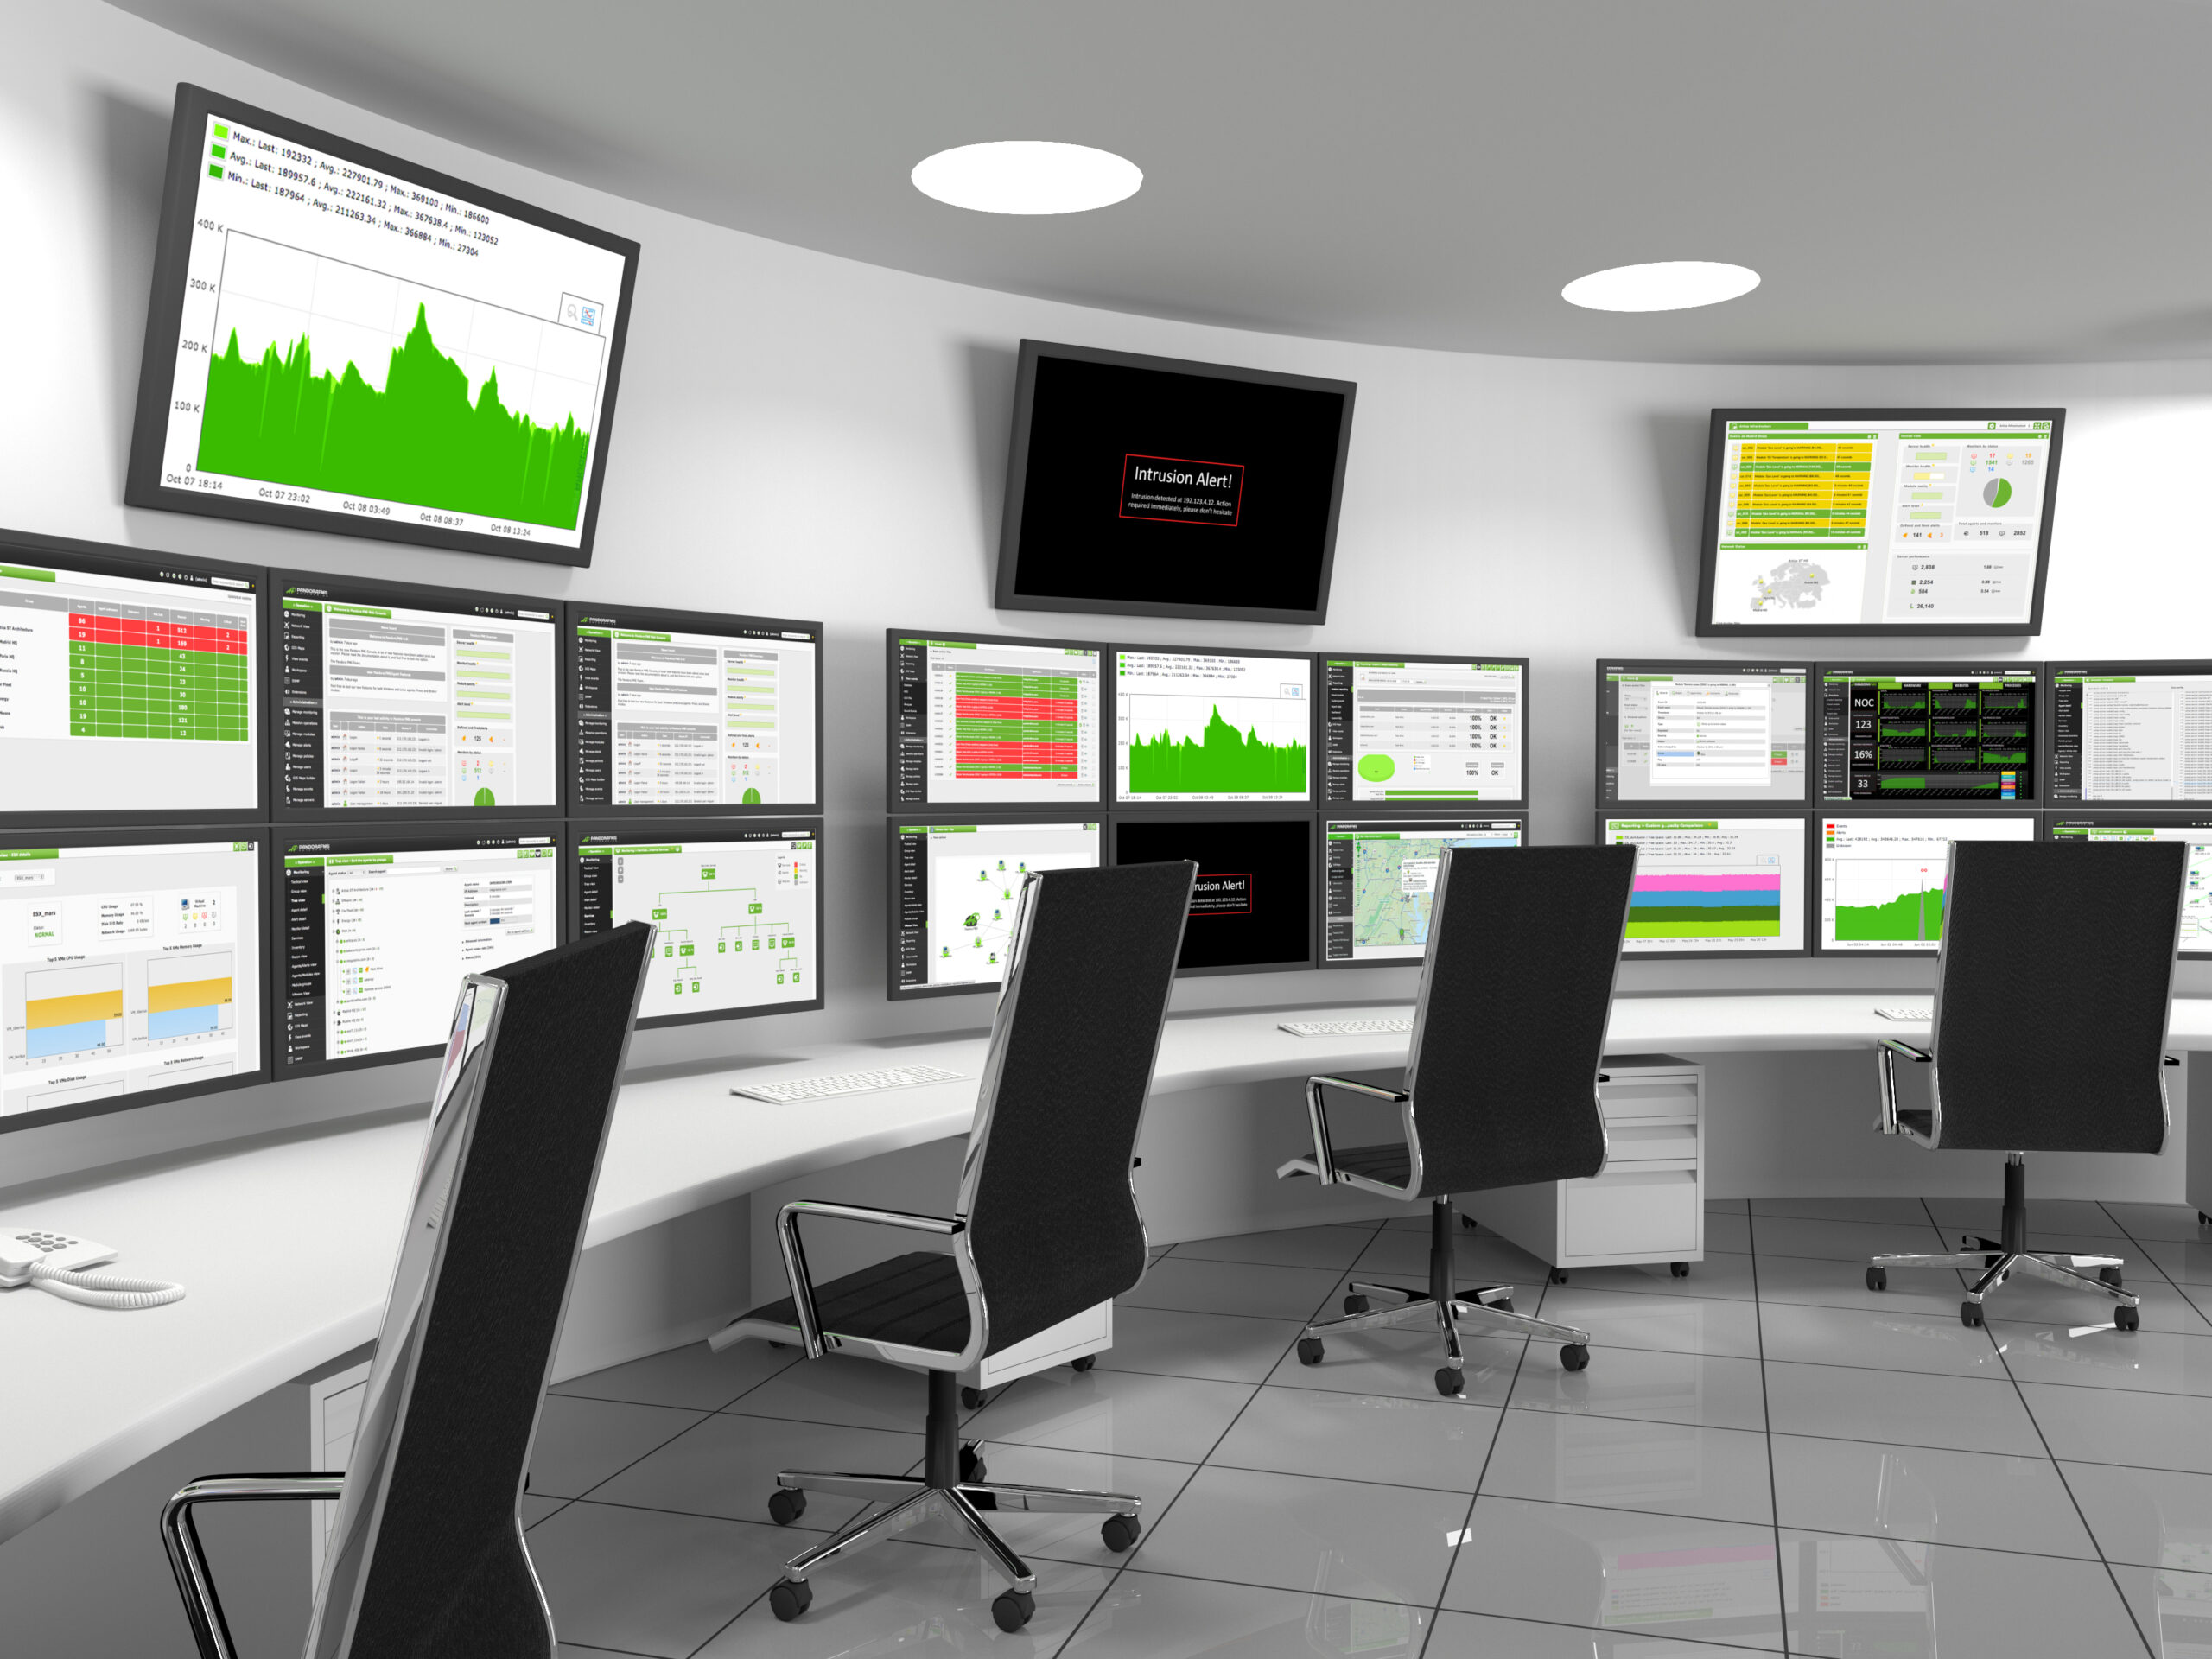 A modern data center management room with multiple computer screens displaying various data analytics, set in a sleek, white office environment with empty chairs.